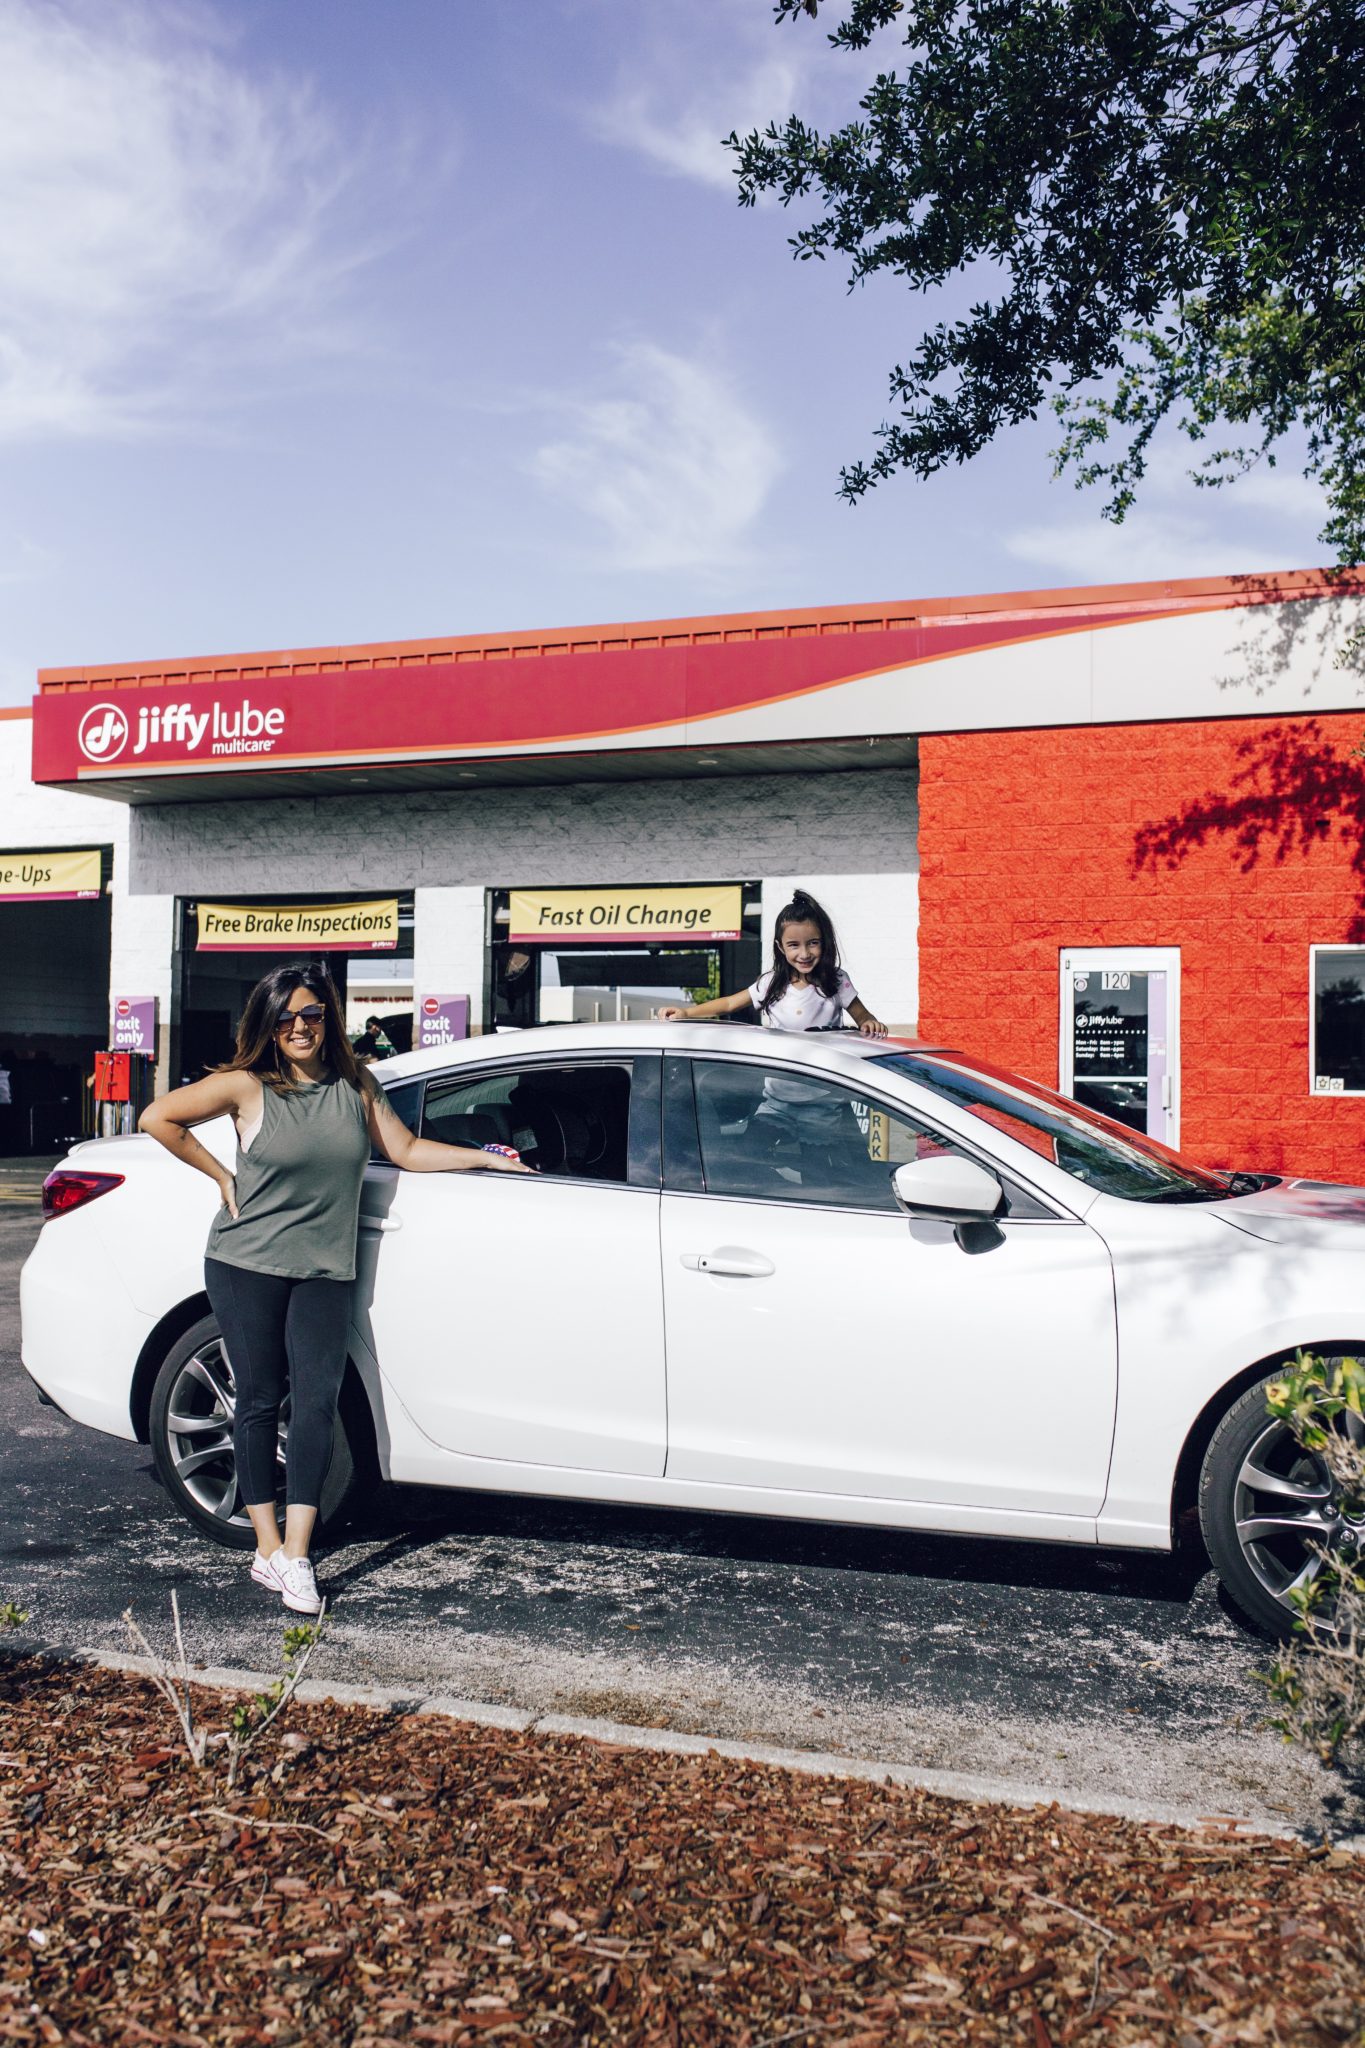 Before you head out on those spring and summer road trips, you must perform these car car tips, especially after a brutal winter. Click to learn more about Jiffy Lube's services. #JLIPartner #CarCareMonth #NationalCarCareMonth